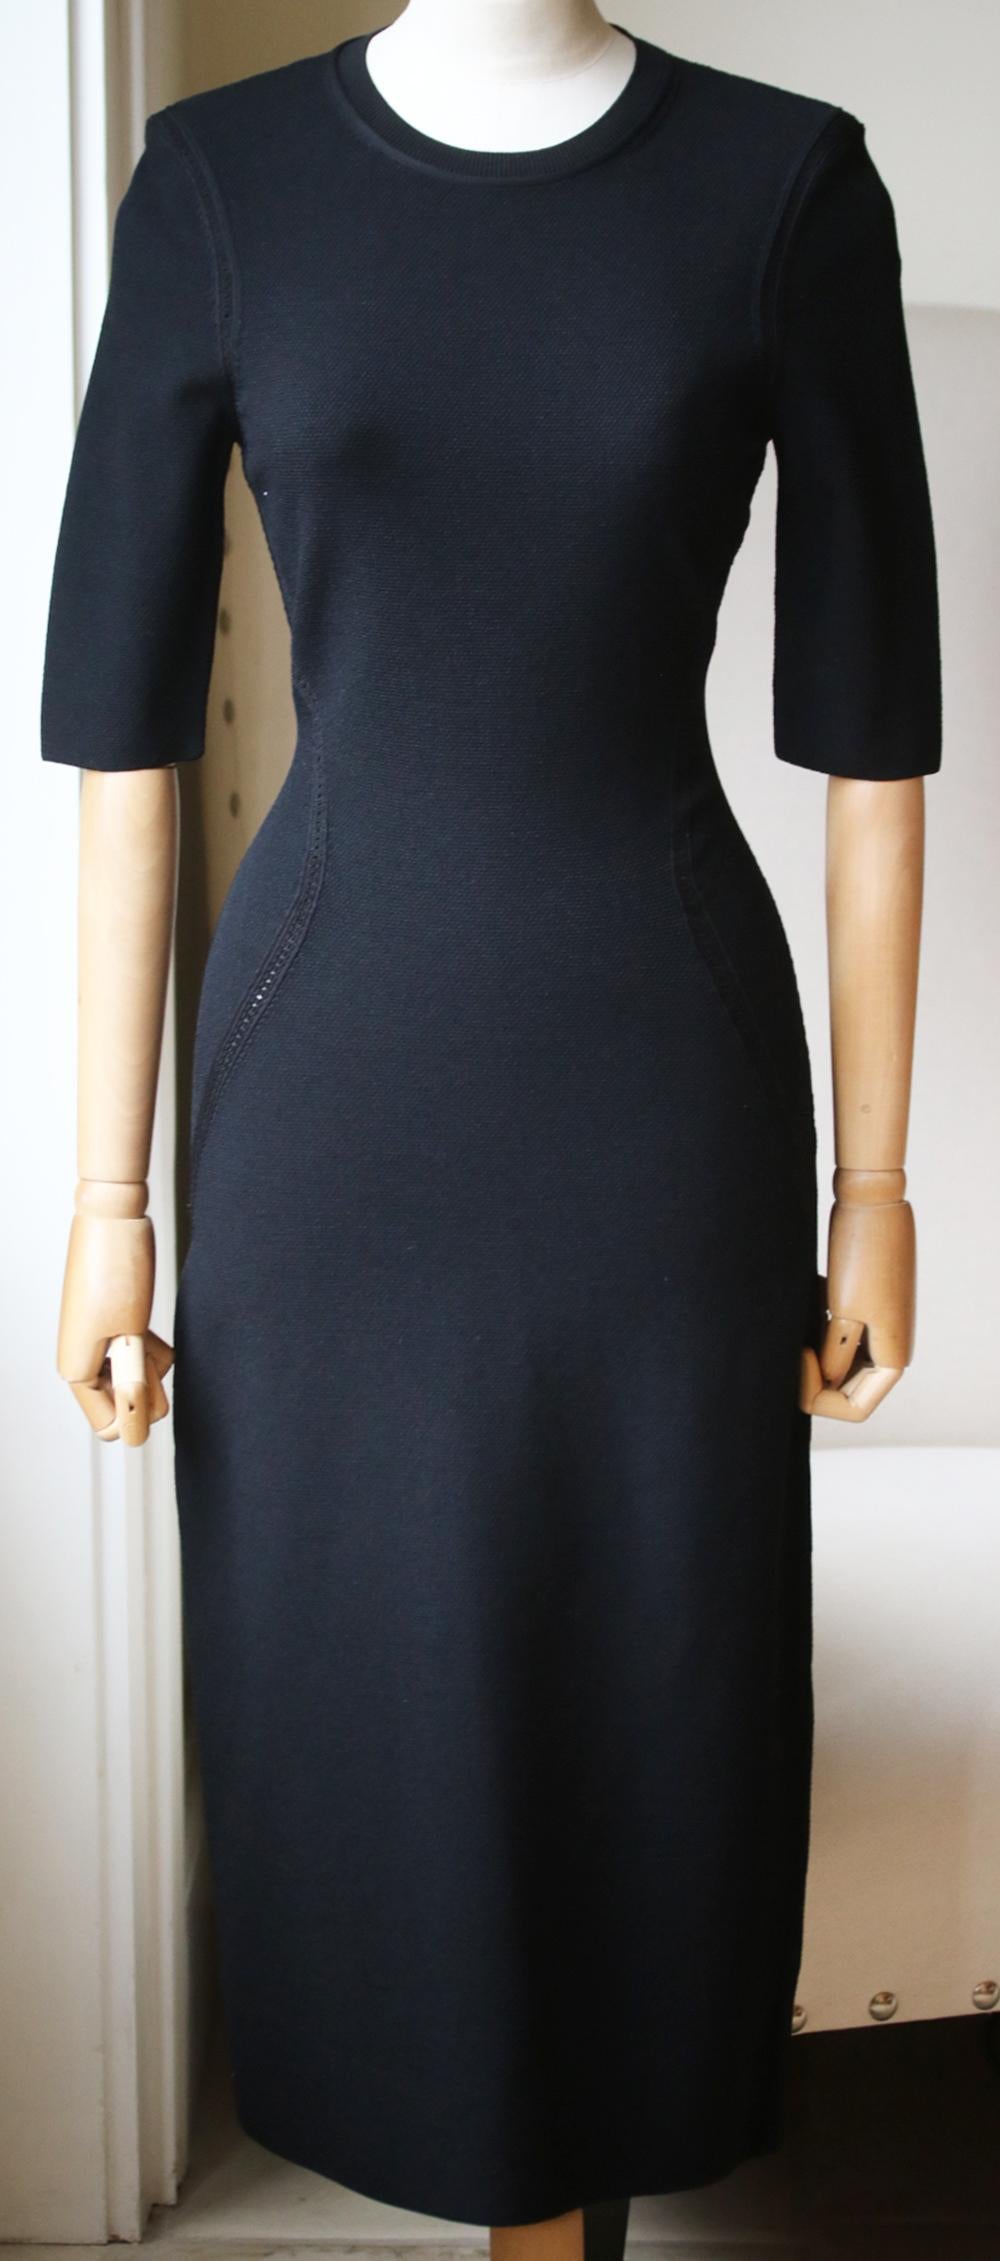 Made in Italy, this stretch-knit piece has a sculpting and smoothing effect, and is designed with a pointelle finish to subtly trace an hourglass silhouette. Black stretch-knit. Slips on. 78% Viscose, 15% polyester, 7% elastane. Made in Italy.